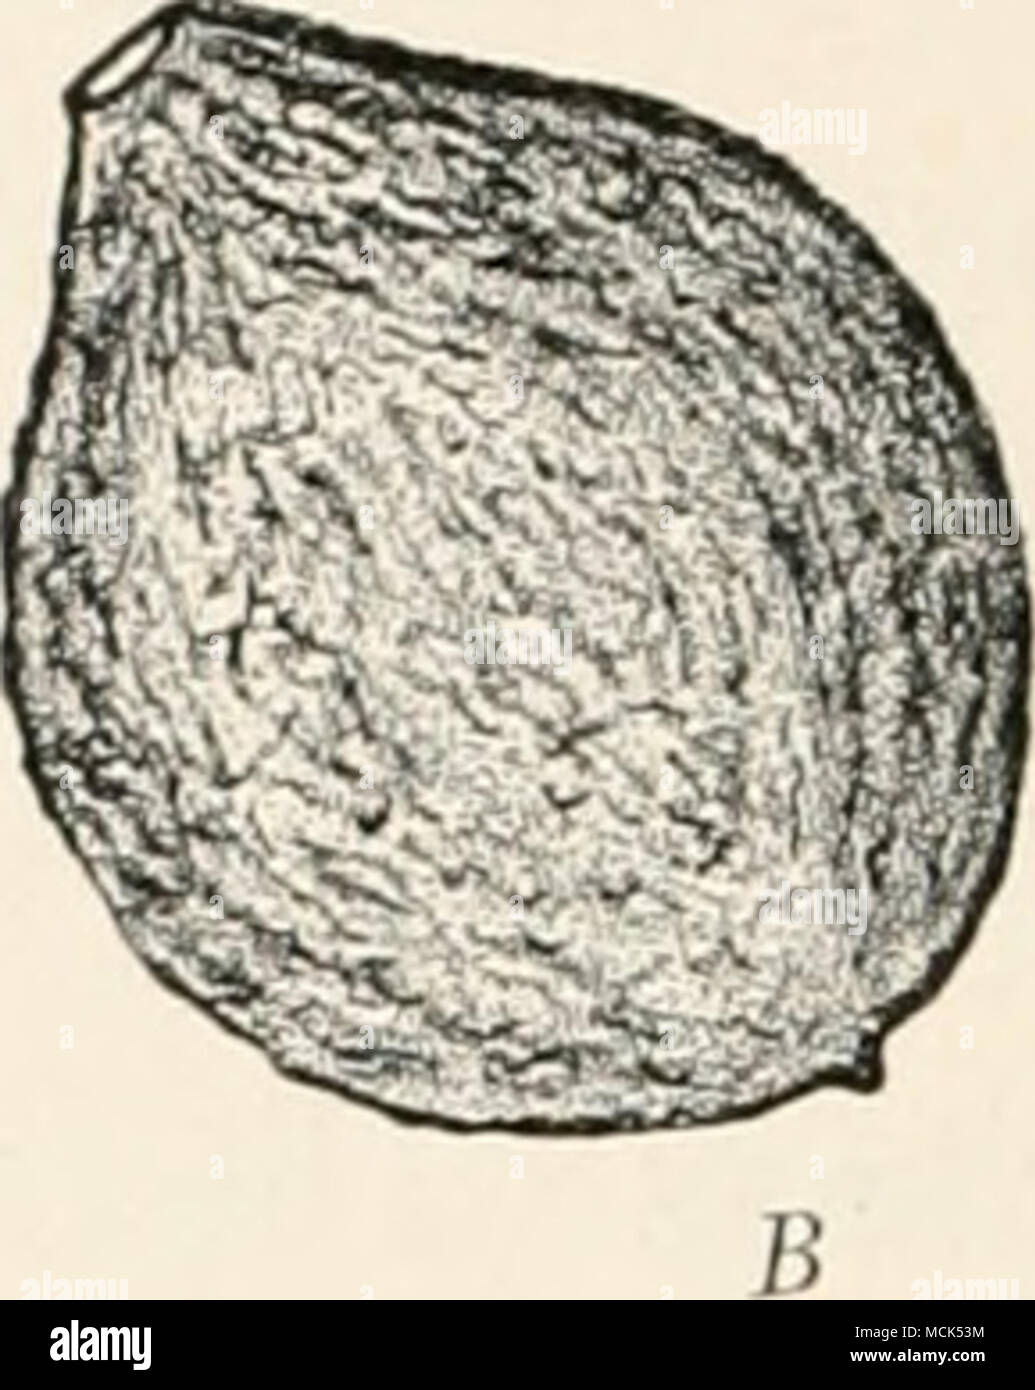 . Fig. 306.—Monitia fruclkjena. A, Apple showing the grey conidial patches as more or less concentric lines. B, Young Peach, slirivelled up in consequence of attack, (v. Tubeuf del.) next spring, when the fruit is again moist, further conidia are given off'. Infection takes place by wounds or even through the epidermis of young leaves and blossoms. The conidia have Stock Photo